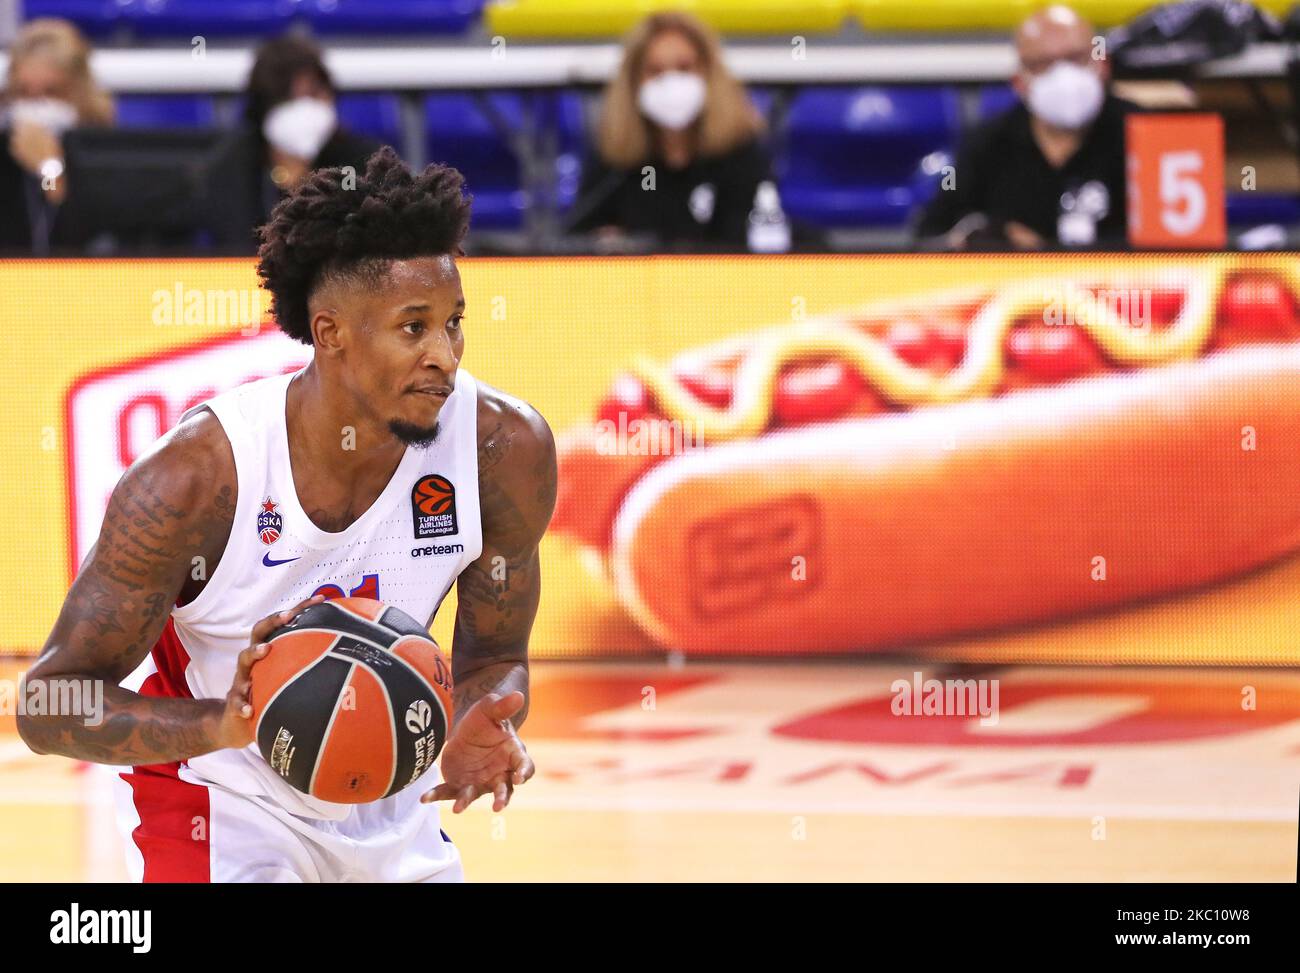 Will Clyburn during the match between FC Barcelona and CSKA Moscow, corresponding to the week 1 of the Euroleague, played at the Palau Blaugrana, on 01st October 2020, in Barcelona, Spain. (Photo by Joan Valls/Urbanandsport/NurPhoto) Stock Photo